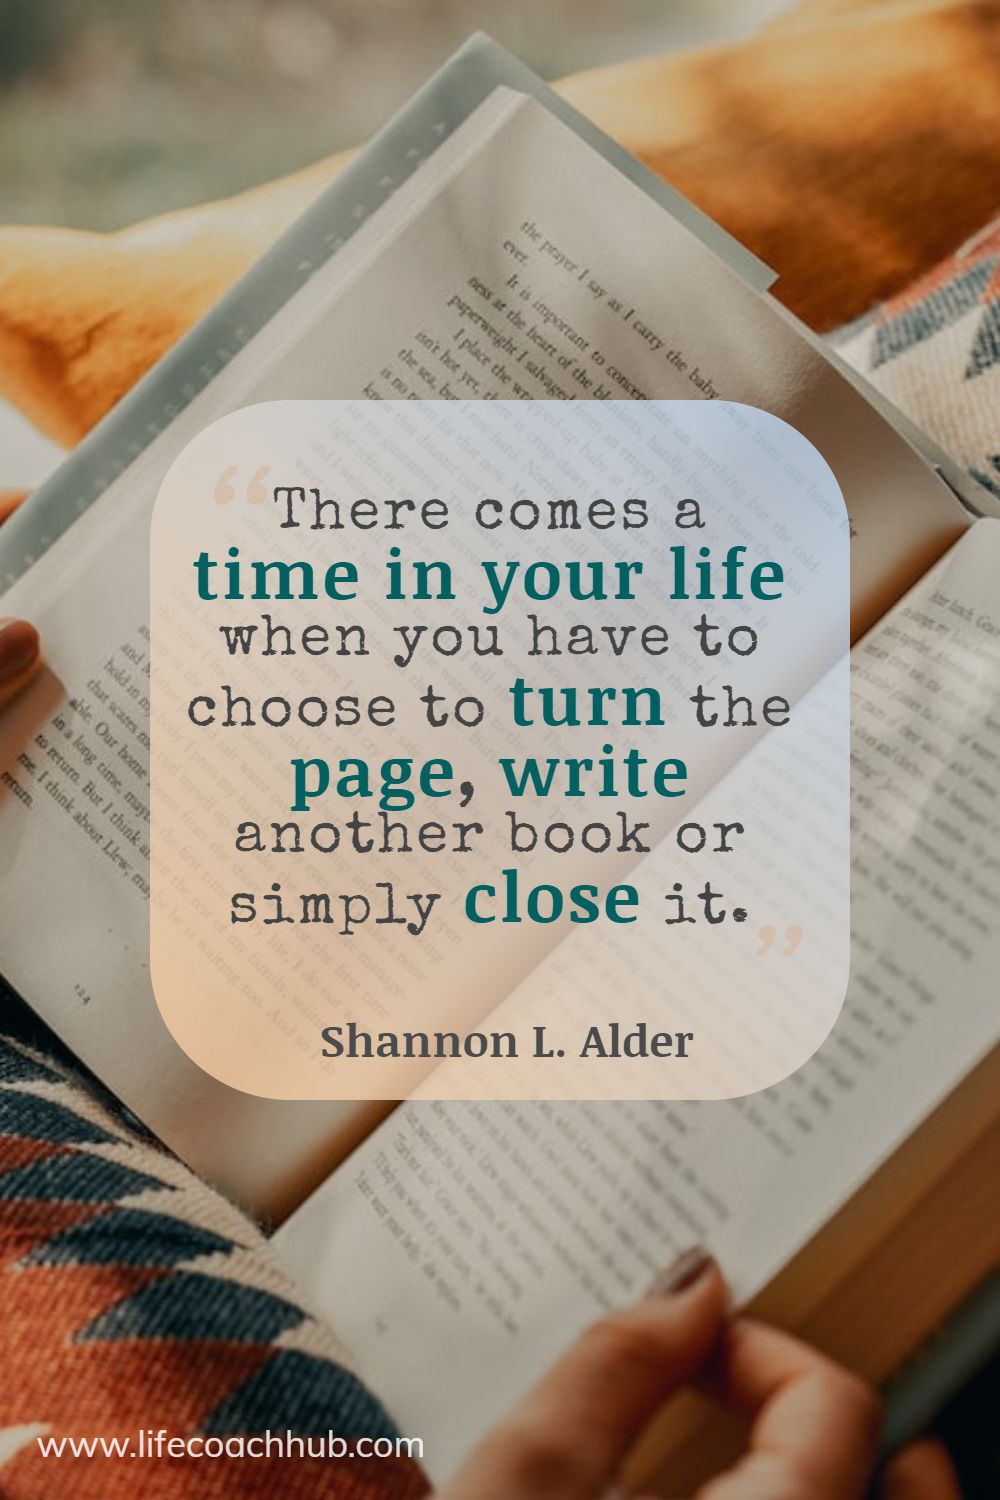 There comes a time in your life when you have to choose to turn the page, write another book or simply close it. Shannon L. Alder Coaching Quote